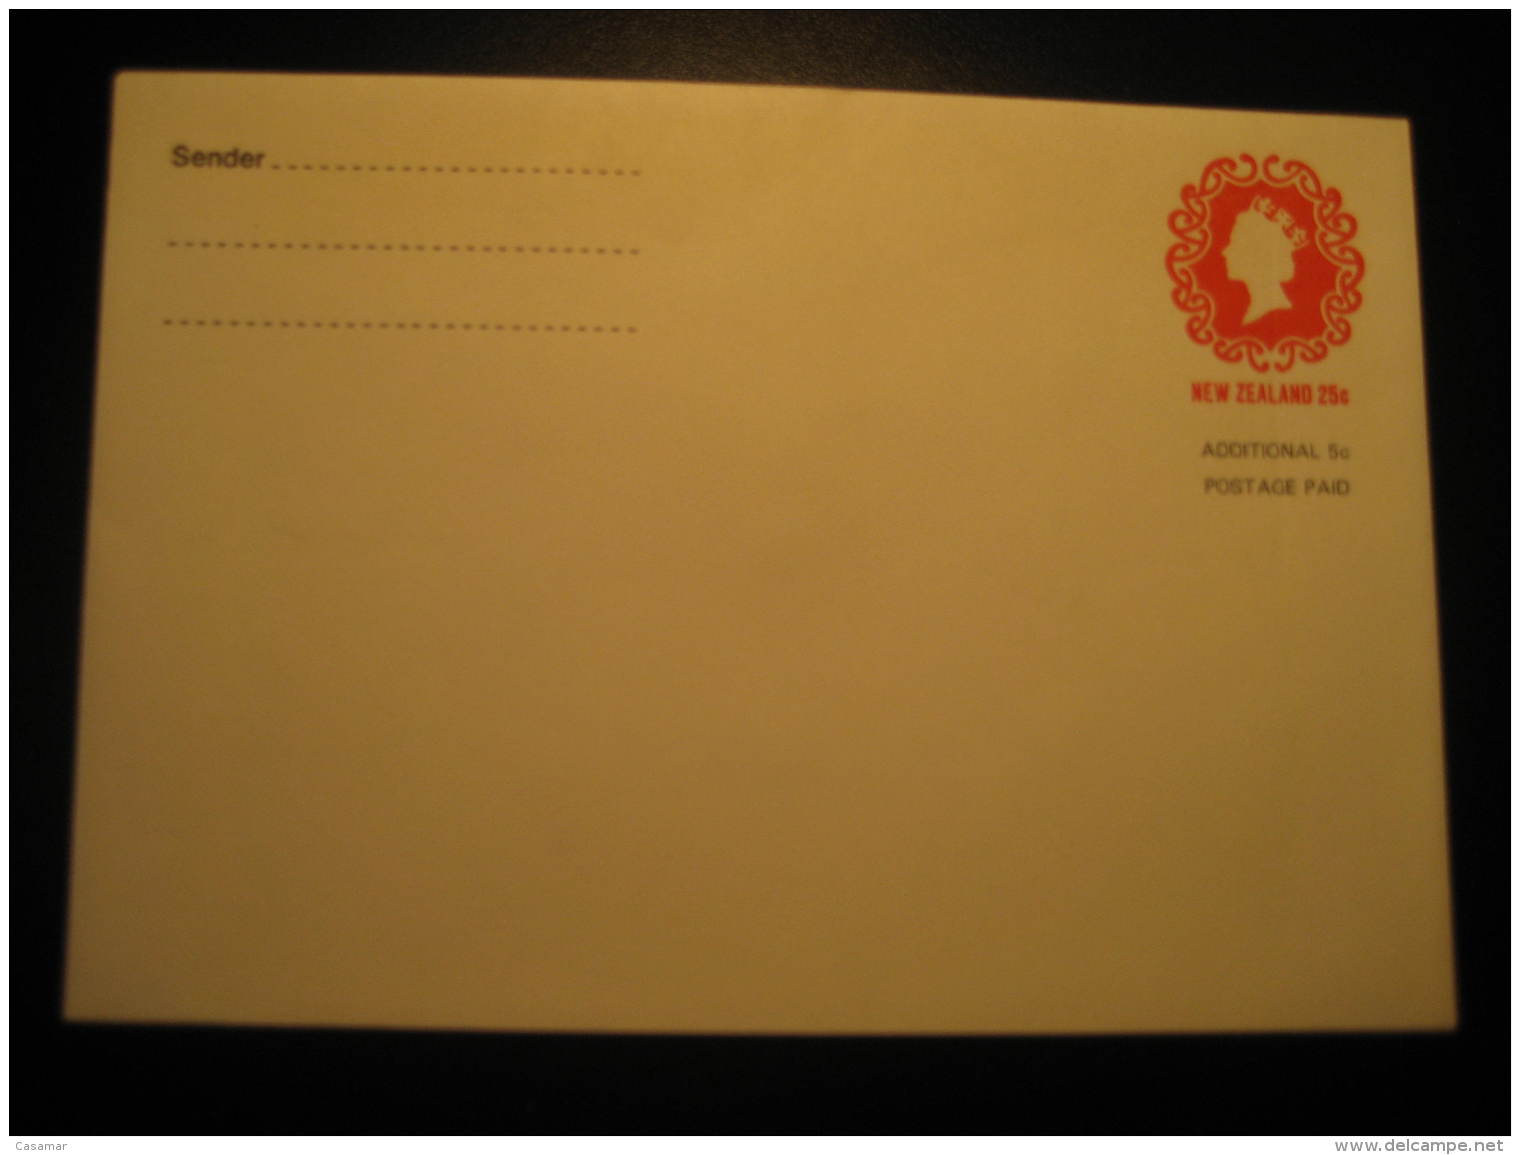 25c Additional 5c Postage Paid Postal Stationery Cover New Zealand - Ganzsachen